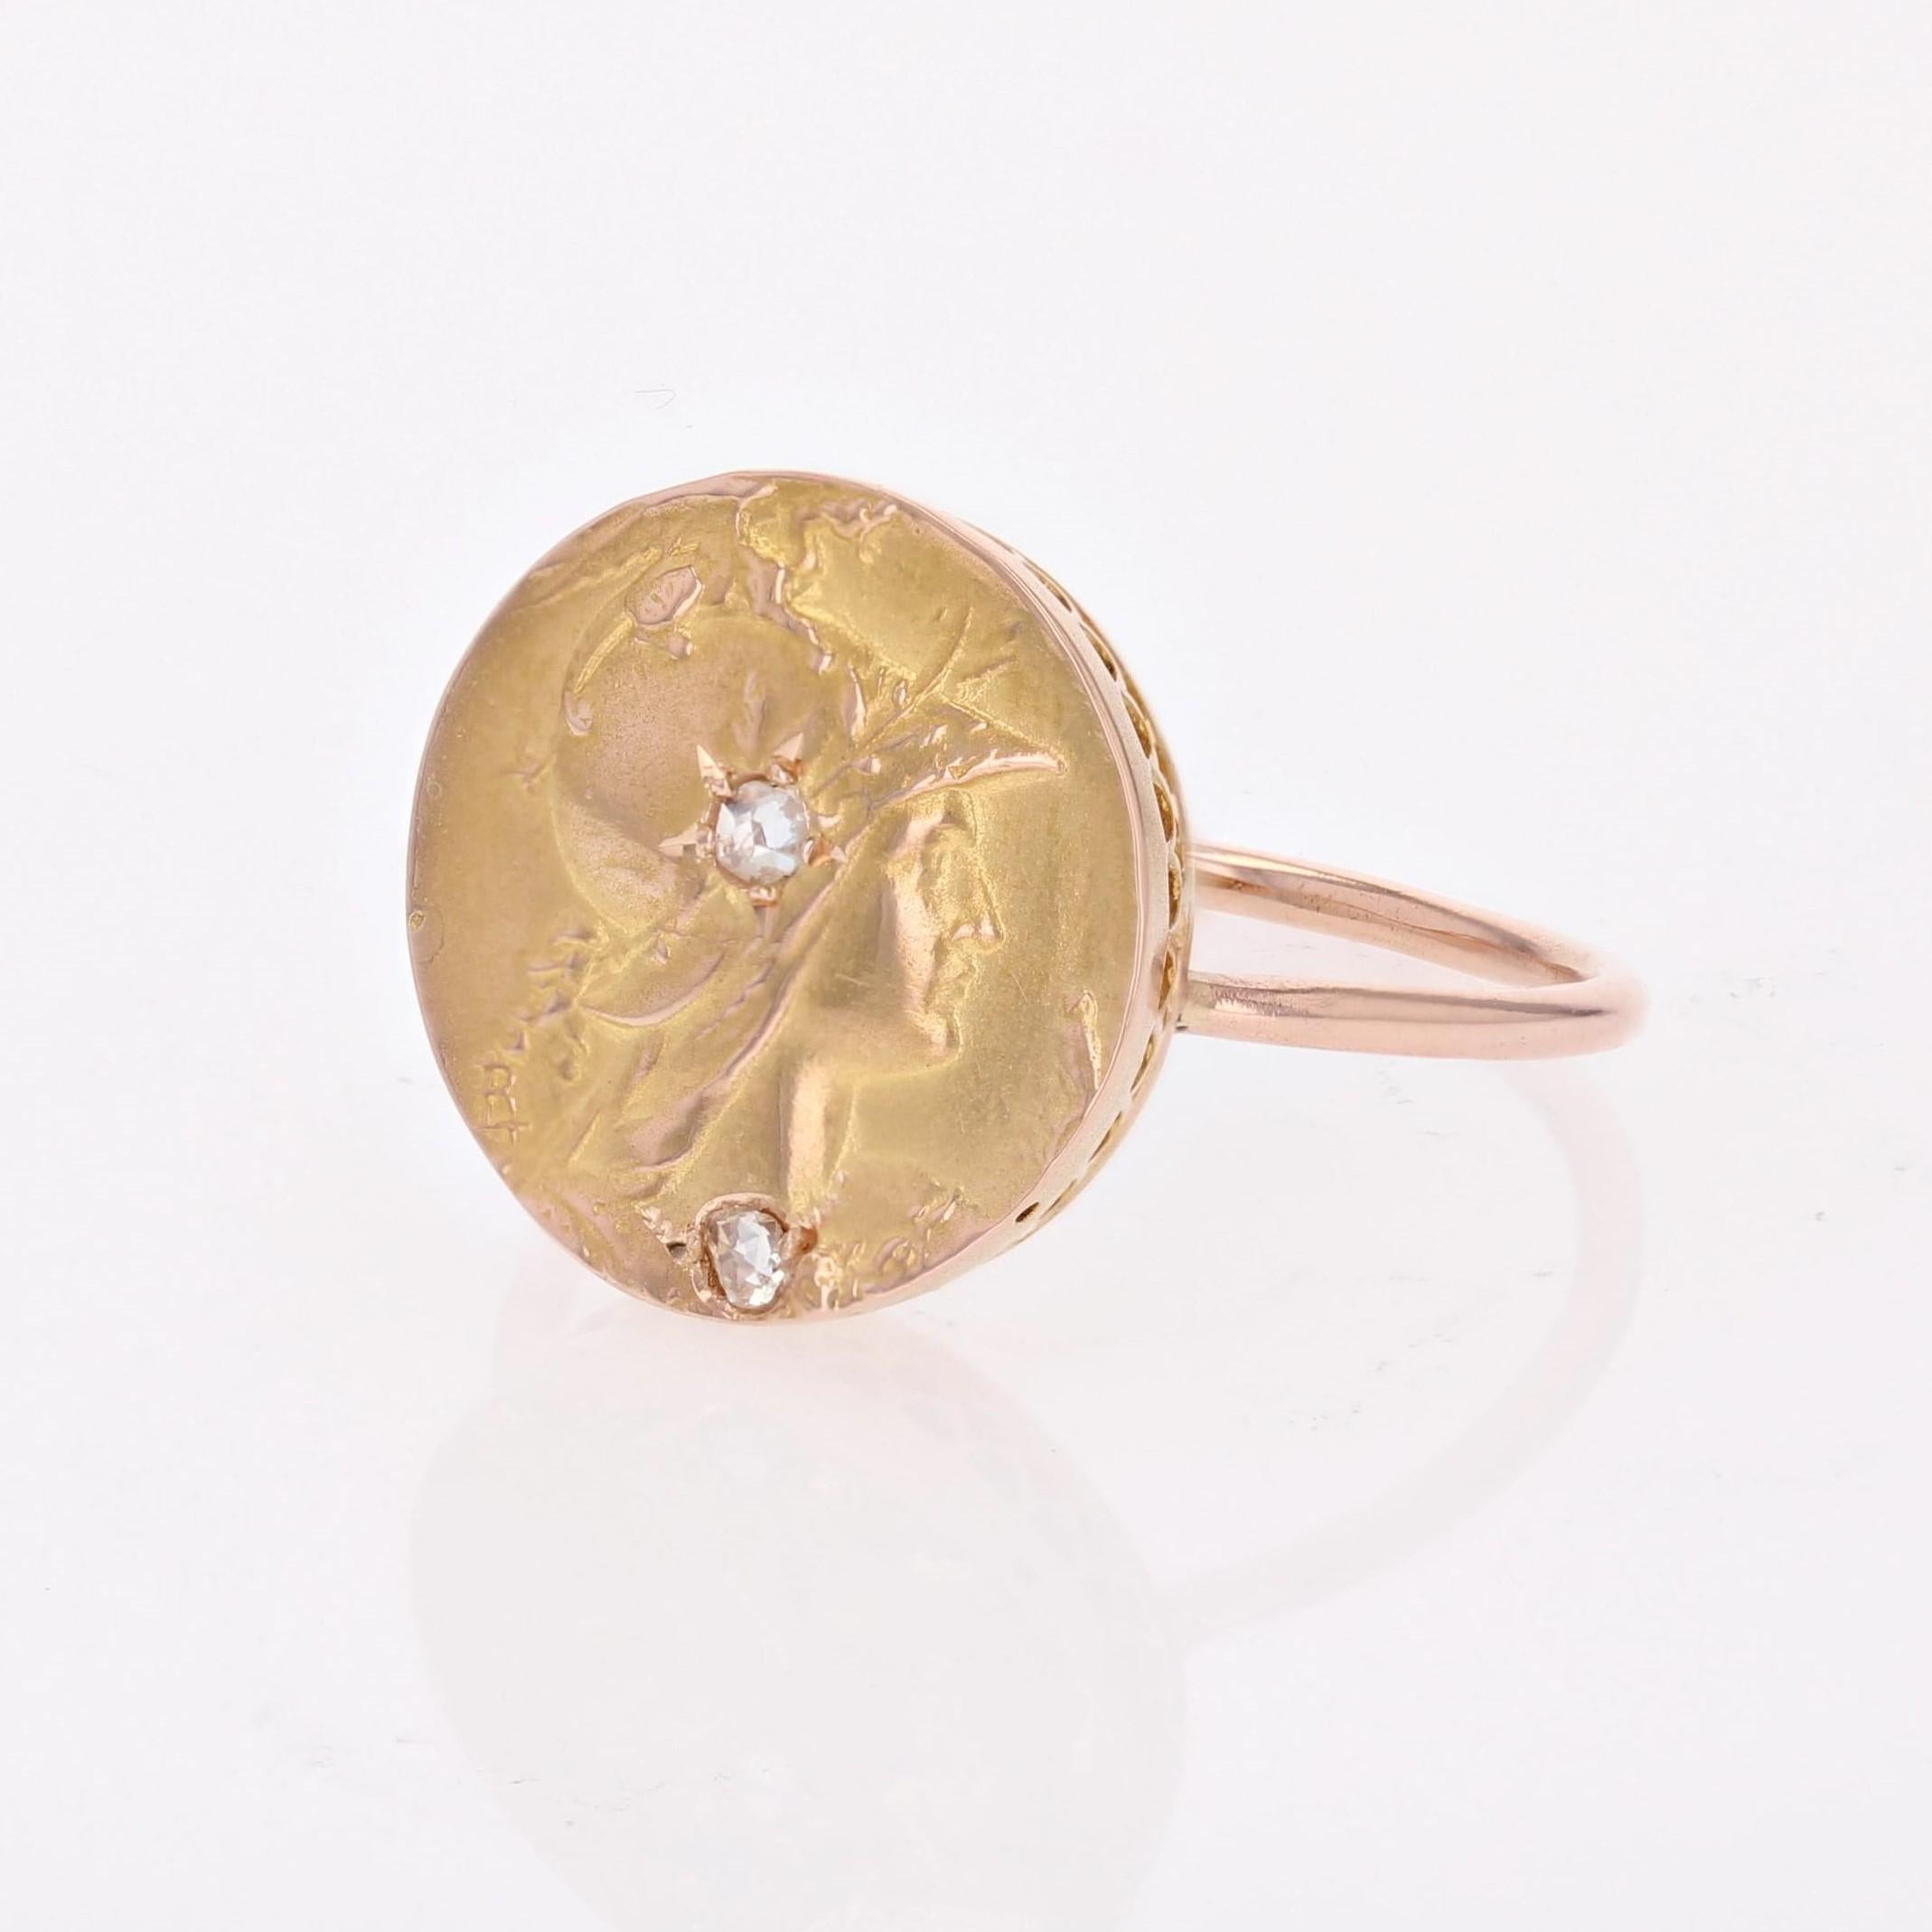 Ring in 18 karat rose gold and yellow gold, eagle head hallmark.
Antique ring of round shape, it is formed of a disc engraved with a pattern of a helmeted minerva surmounted by a chimera. 2 rose- cut diamonds in star settings decorate the all. The